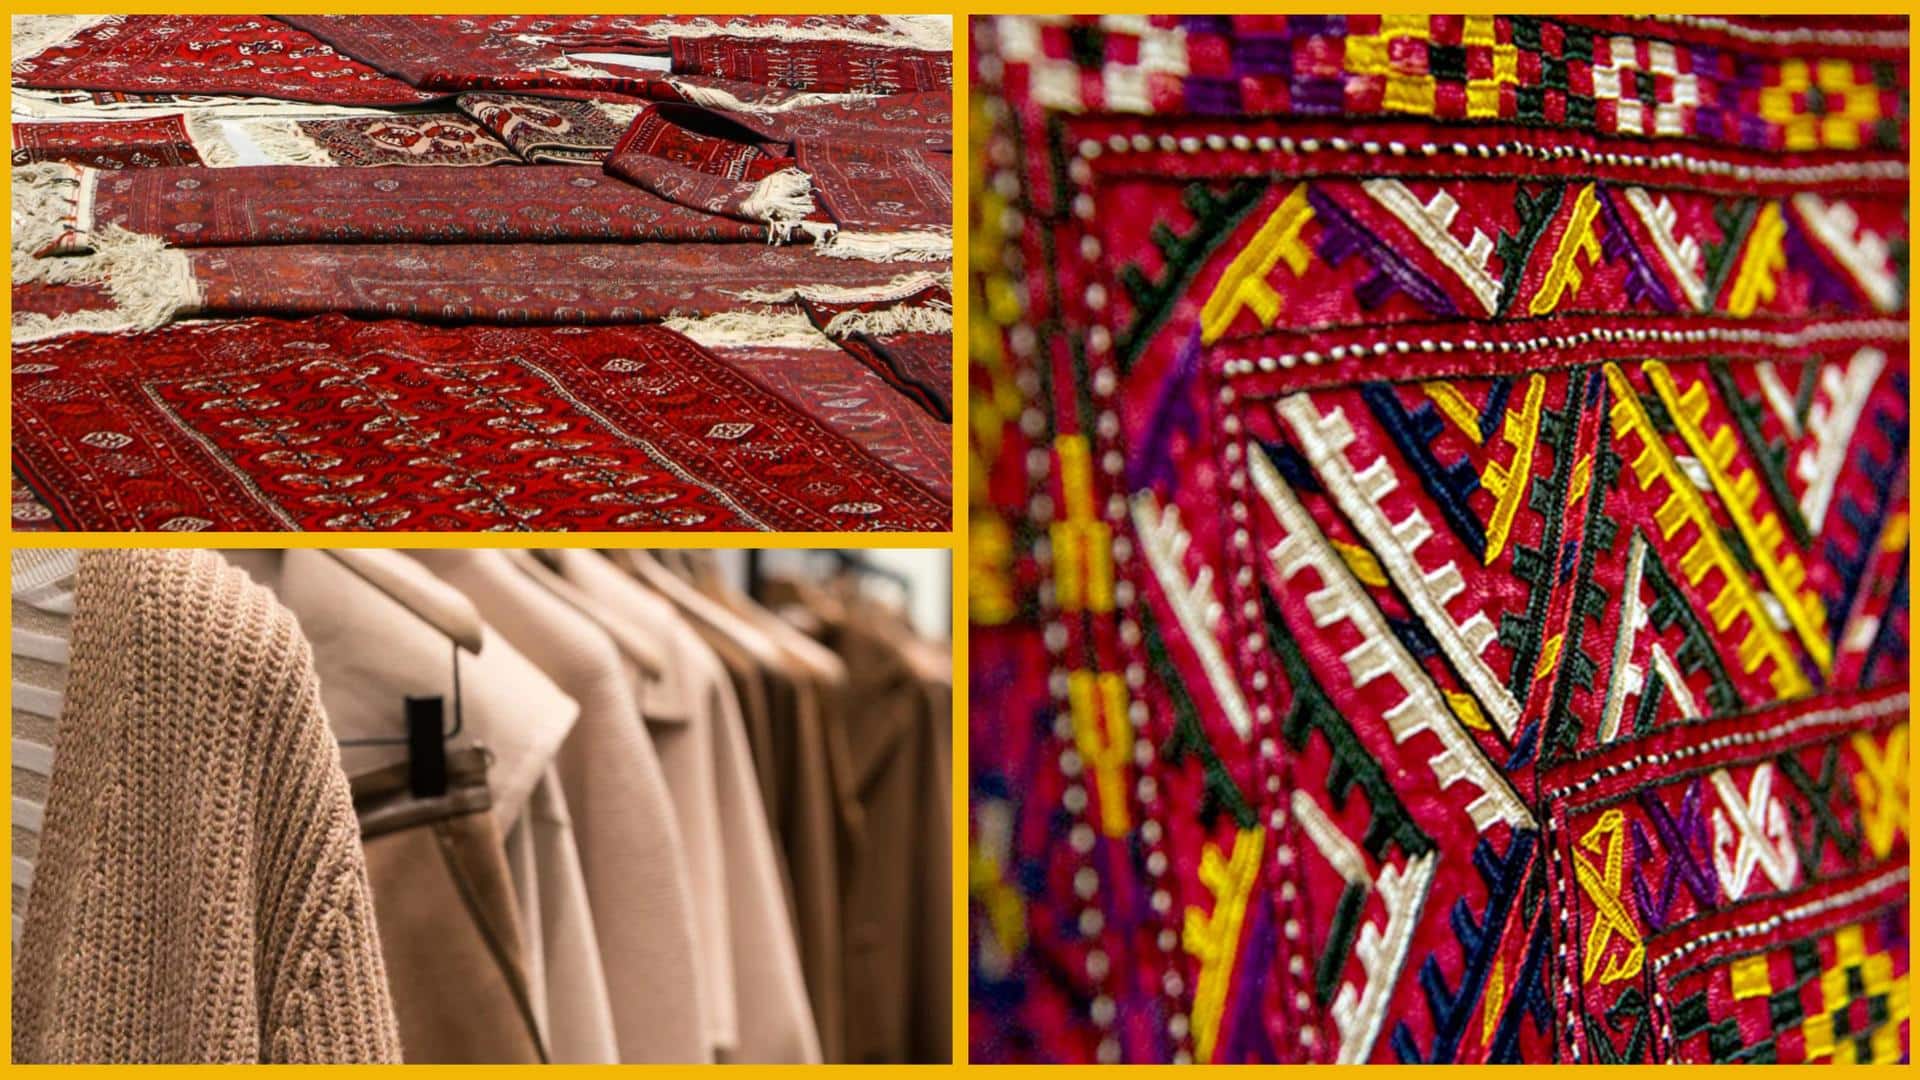 Souvenirs to get back from Turkmenistan